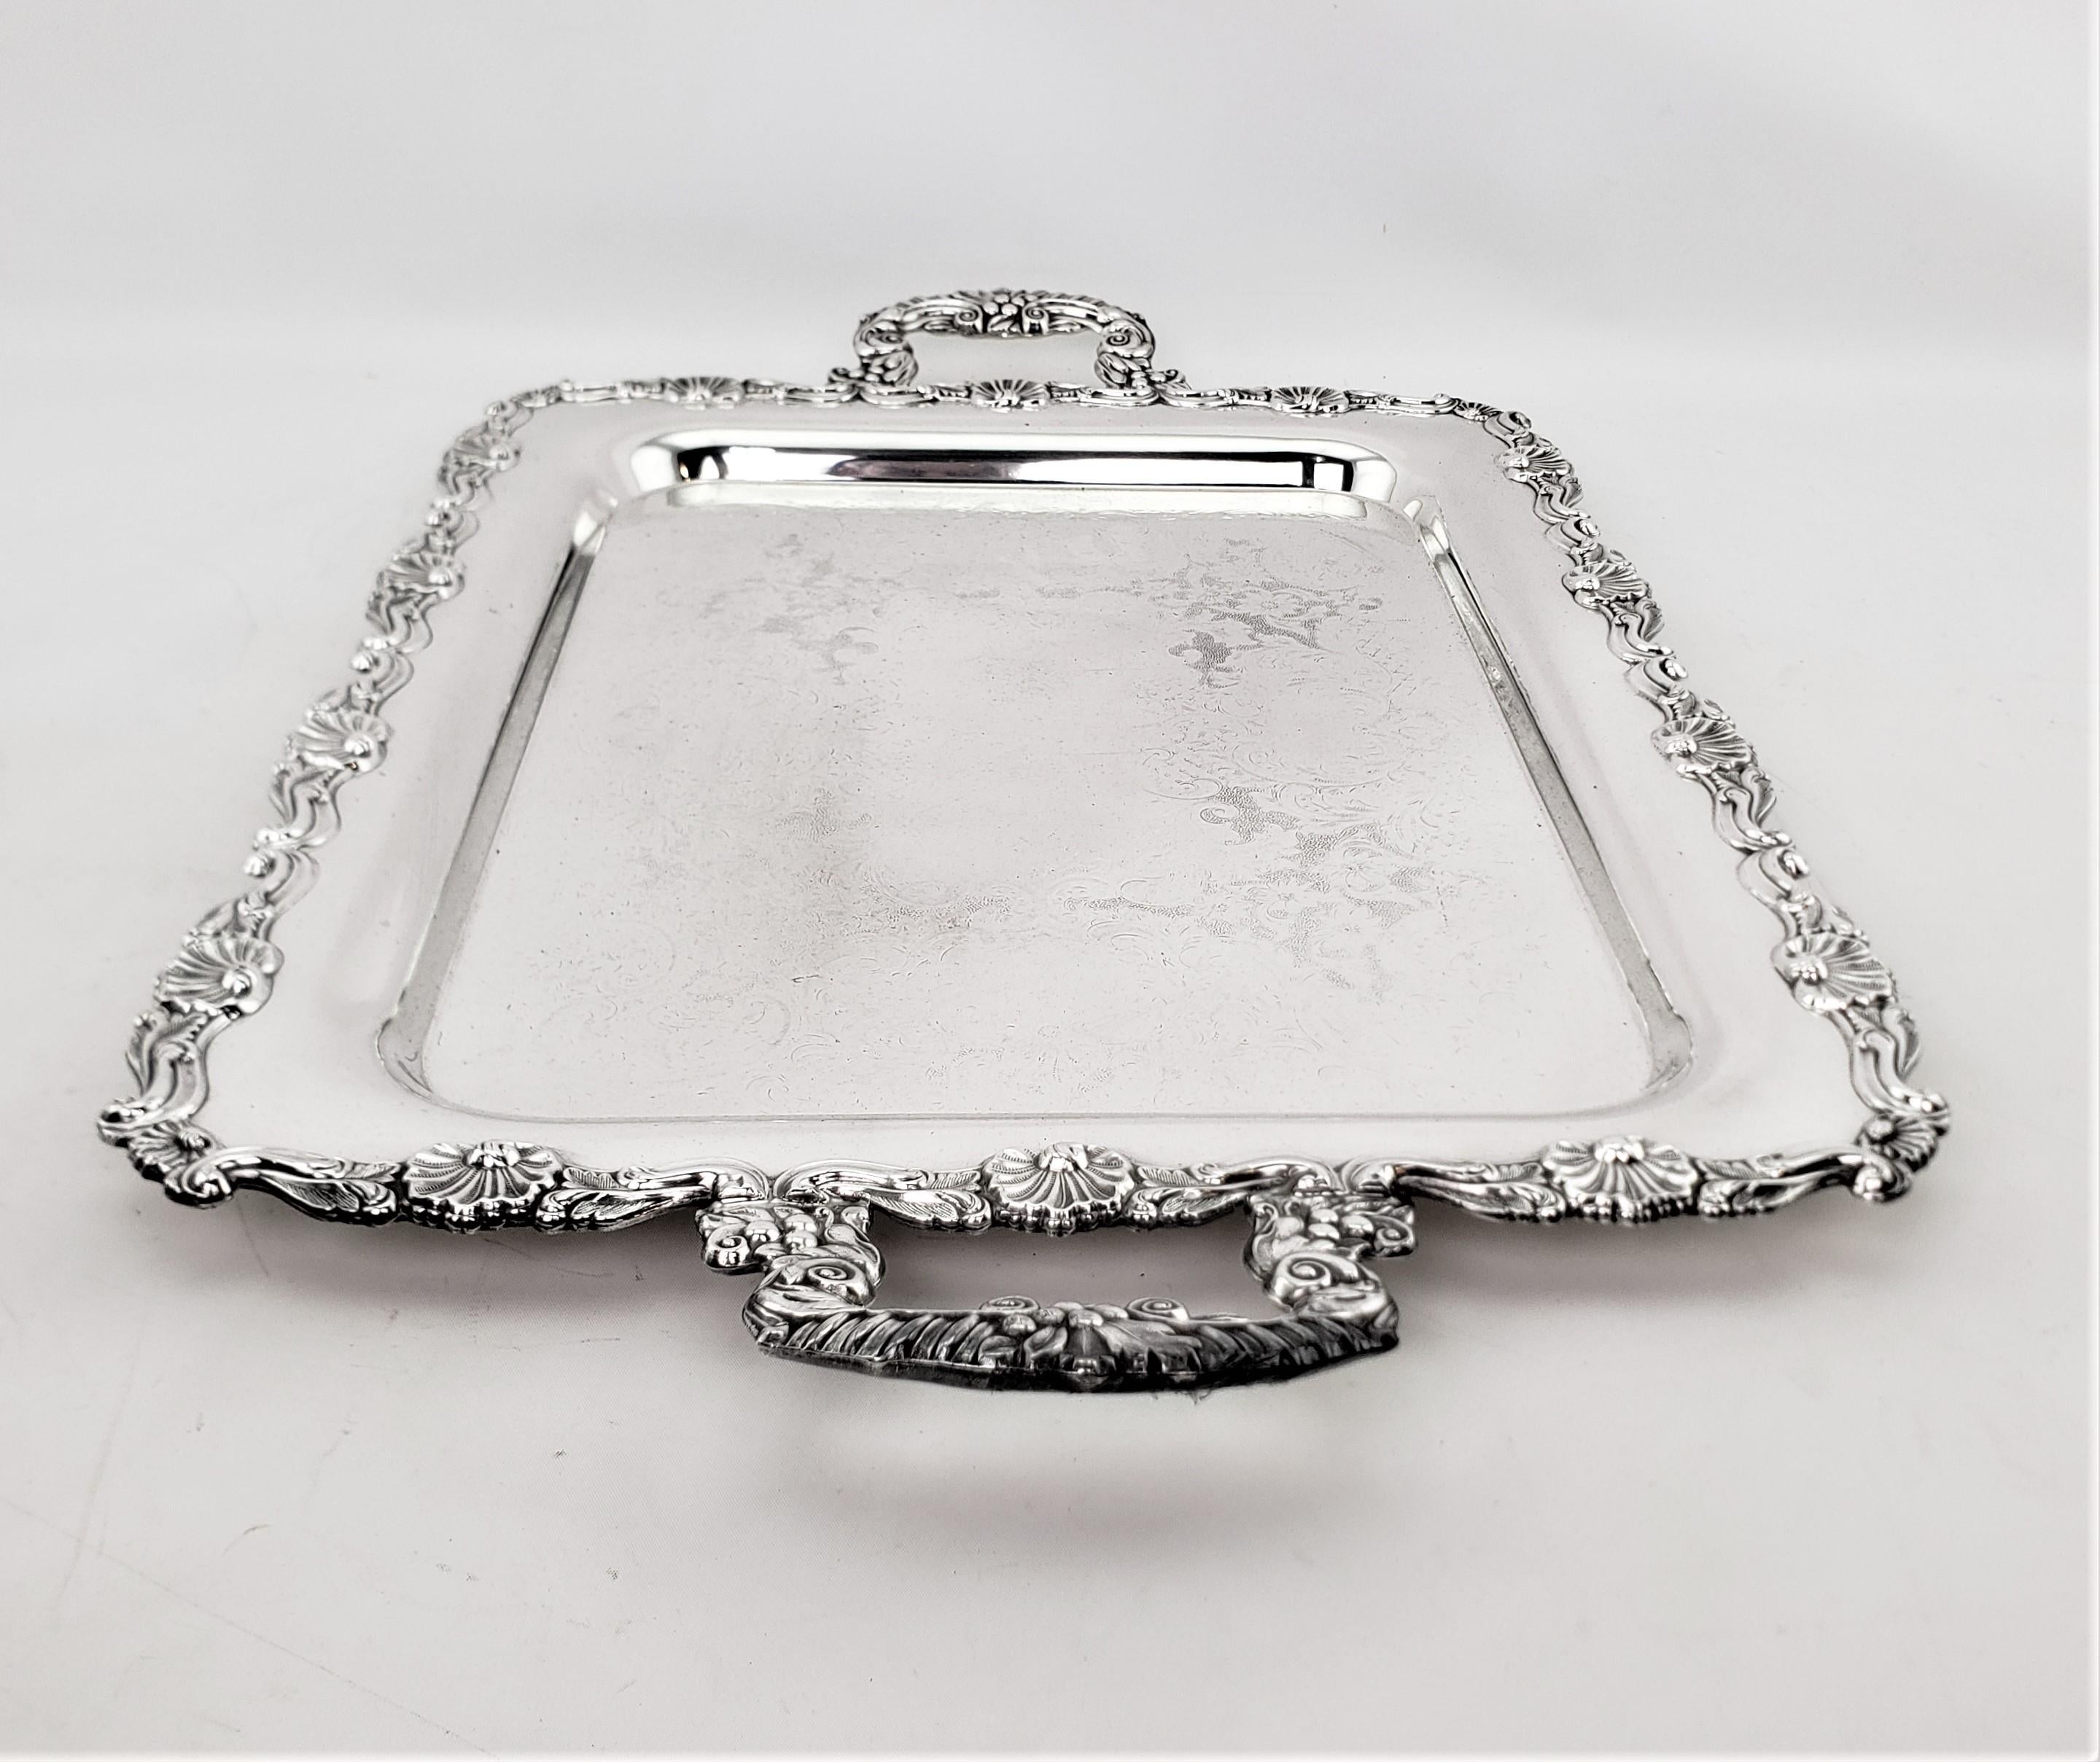 Antique Rectangular Silver Plated Serving Tray with Stylized Floral Decoration In Good Condition For Sale In Hamilton, Ontario